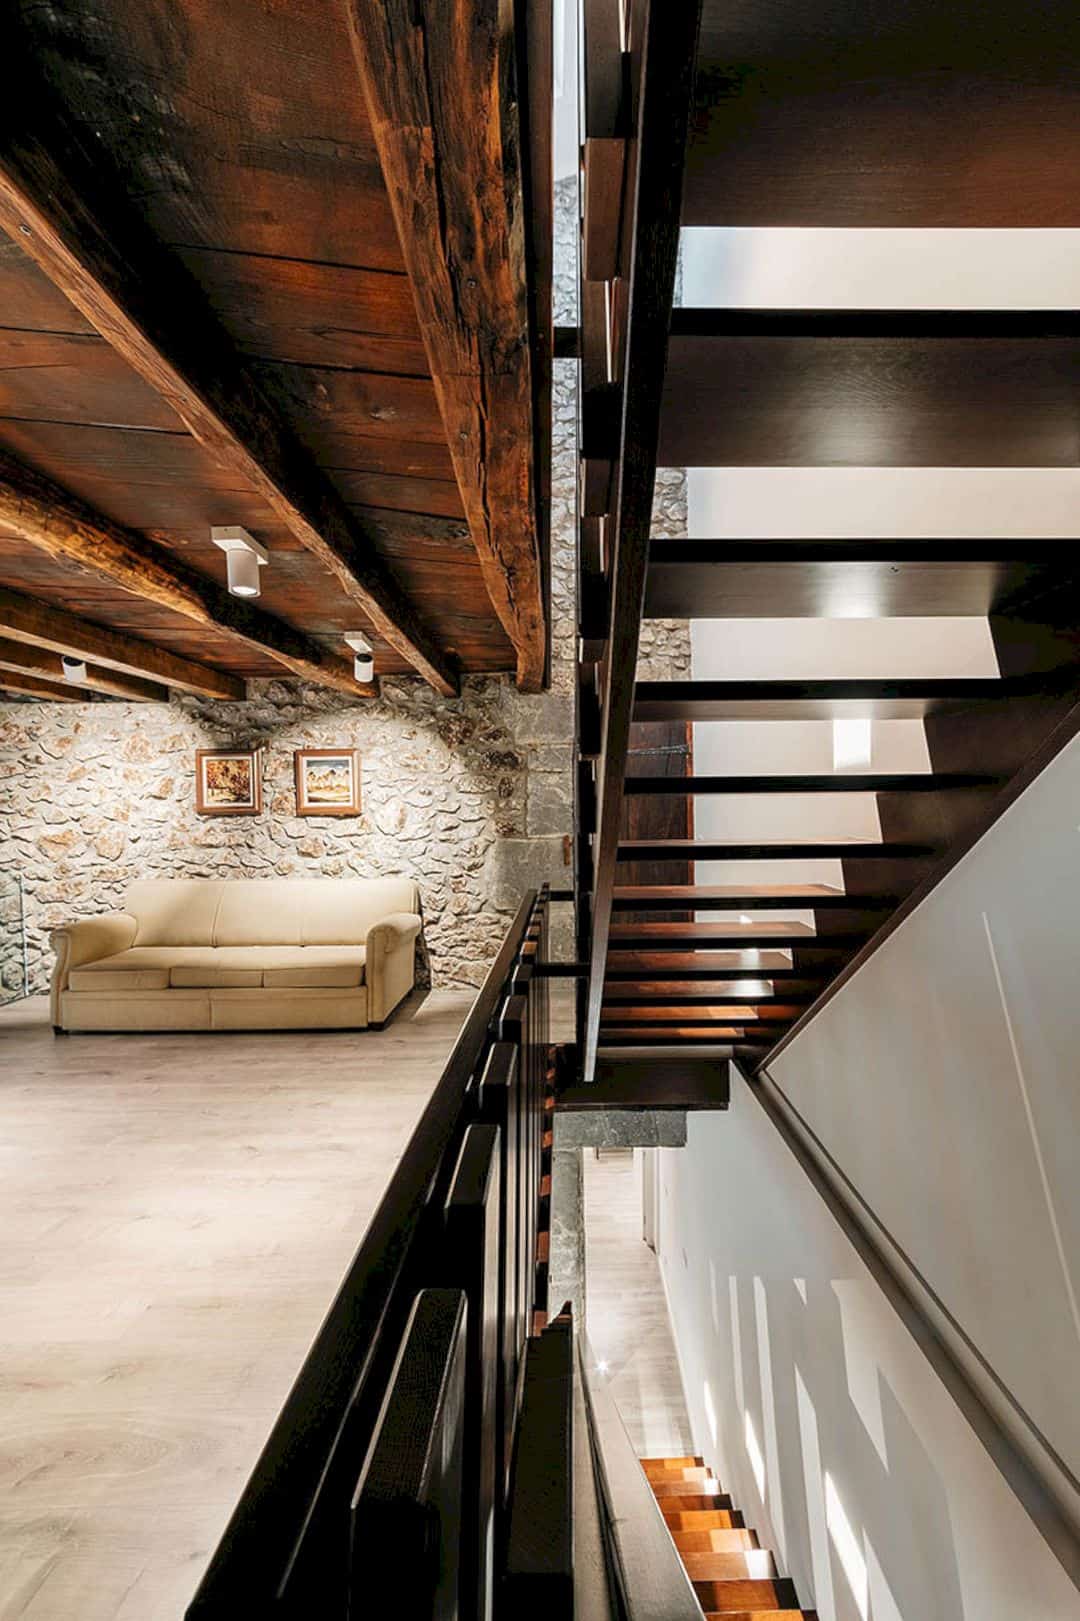 The Transformation Of A 300 Year Old Baserri Into A Modern Dwelling 1